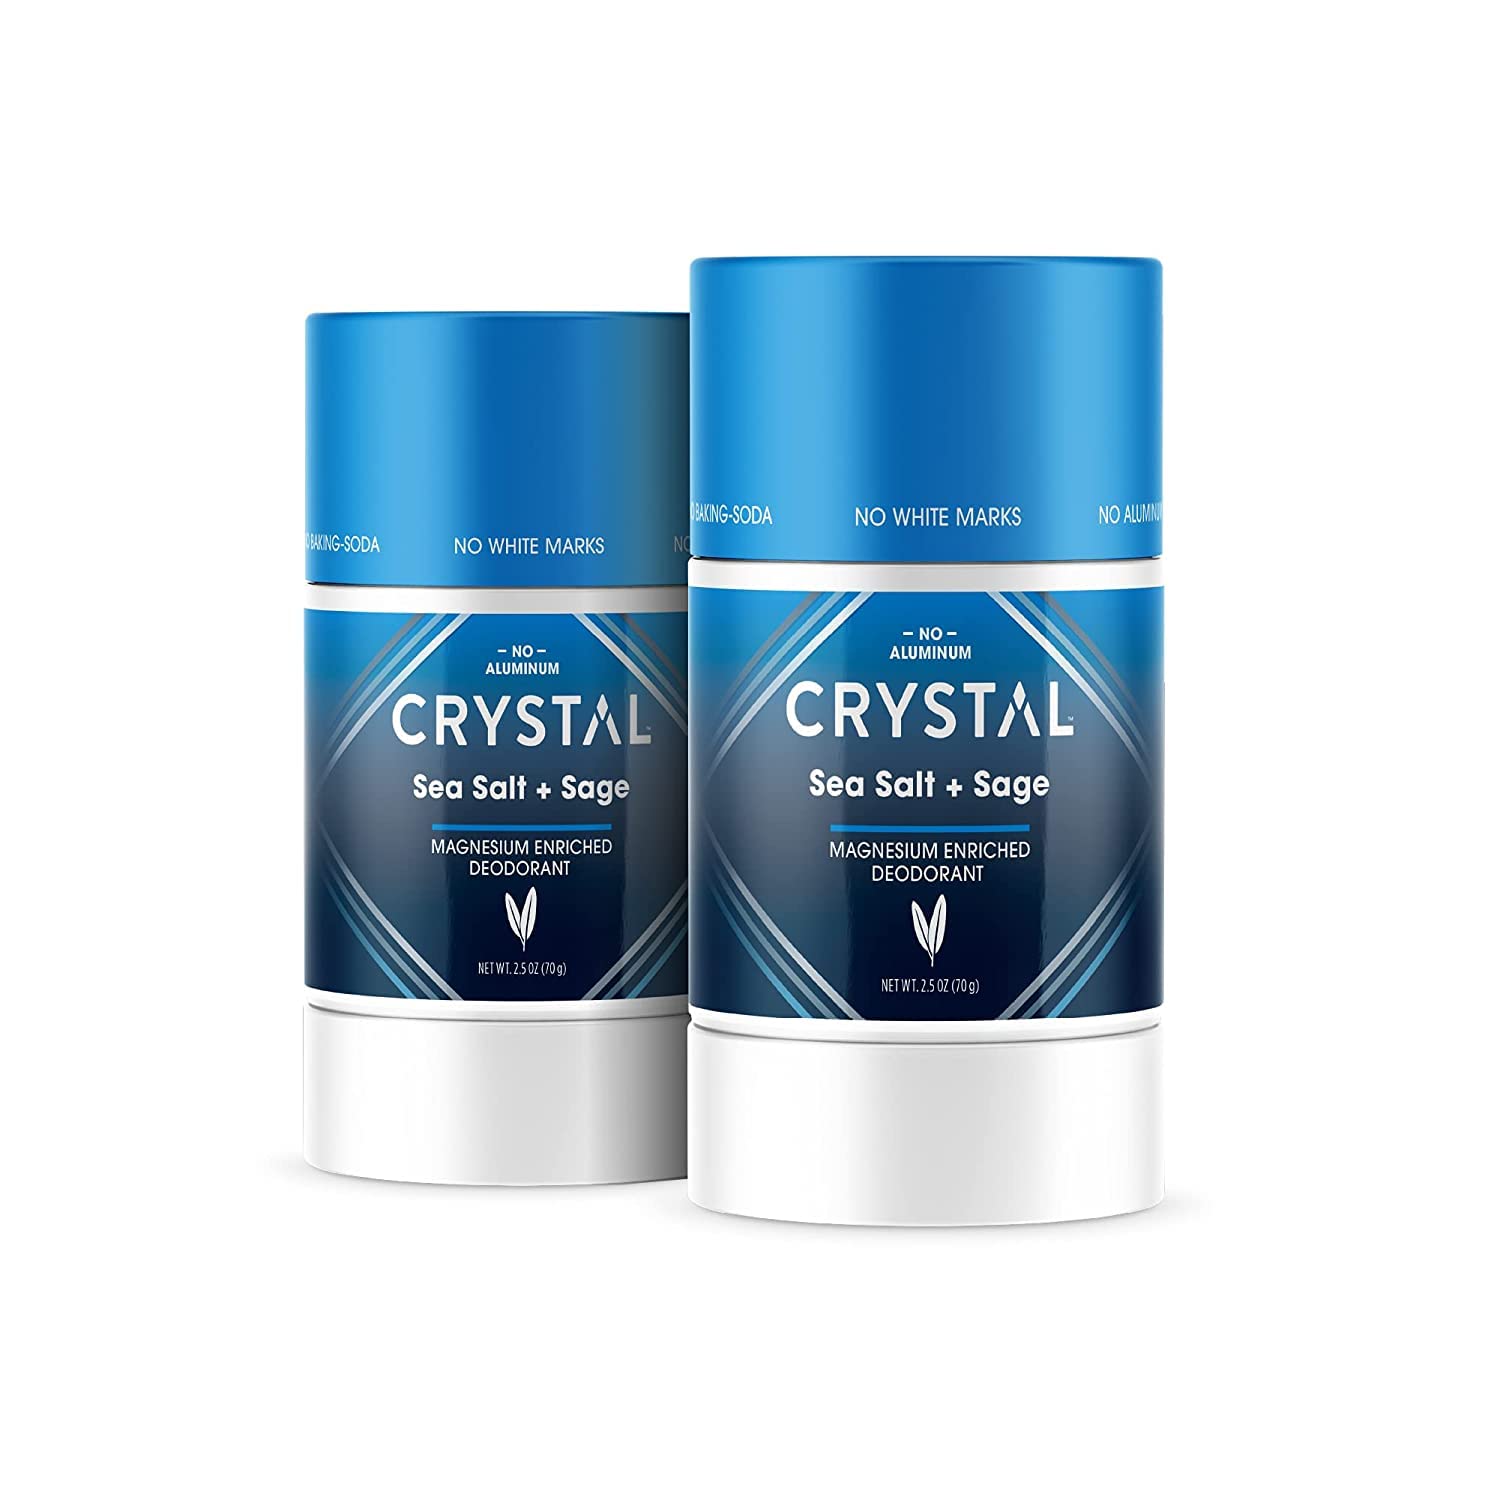 CRYSTAL Magnesium Solid Stick Natural Deodorant, Non-Irritating Aluminum Free Deodorant for Men or Women, Safely and Effectively Fights Odor, Baking Soda Free, Sea Salt + Sage, 2.5 oz (Pack of 2)